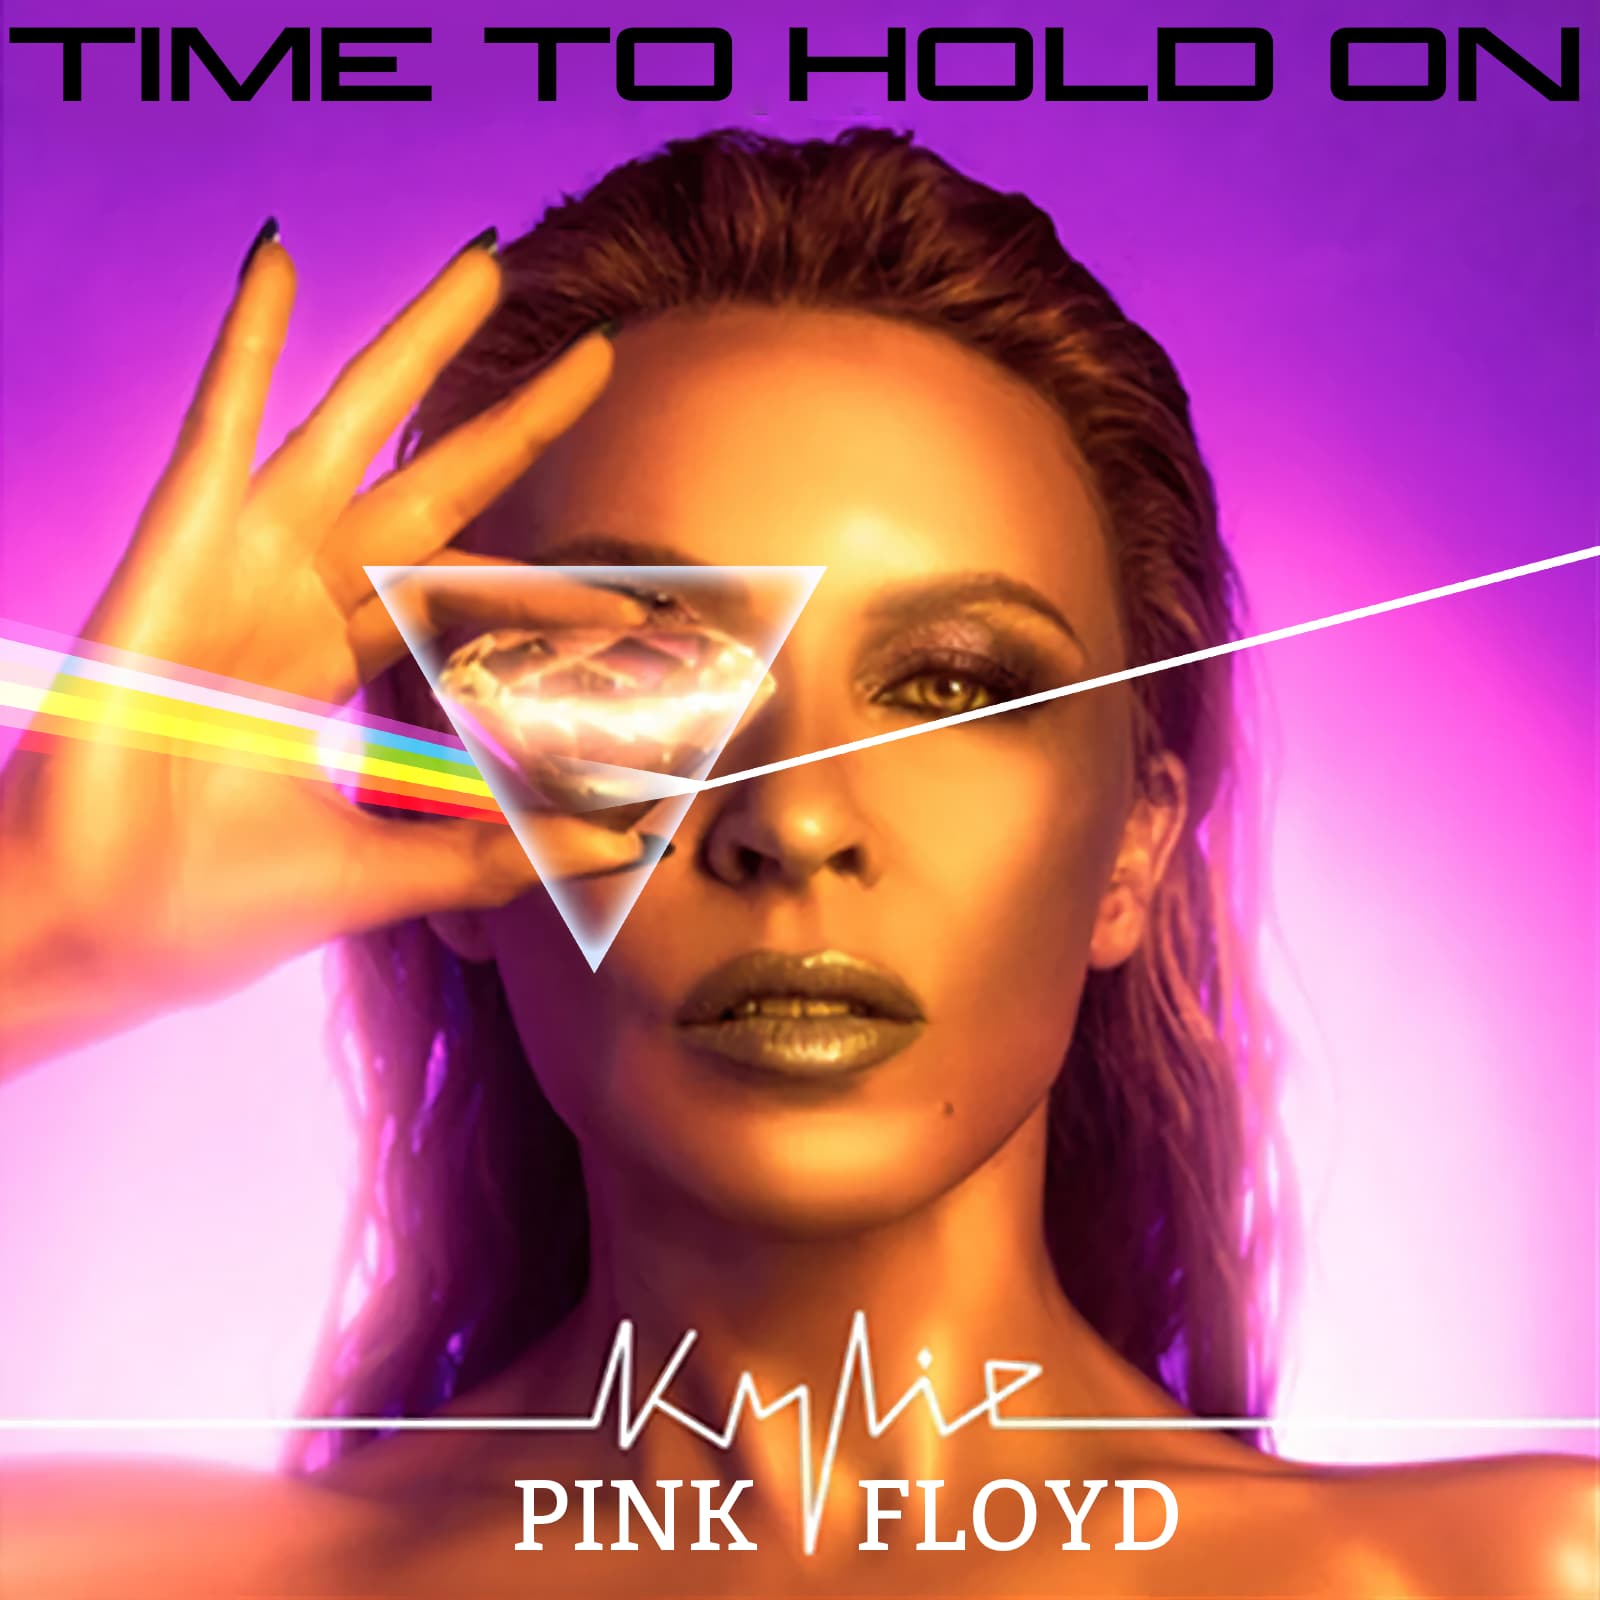 Time To Hold On (Kylie Minogue vs Pink Floyd)